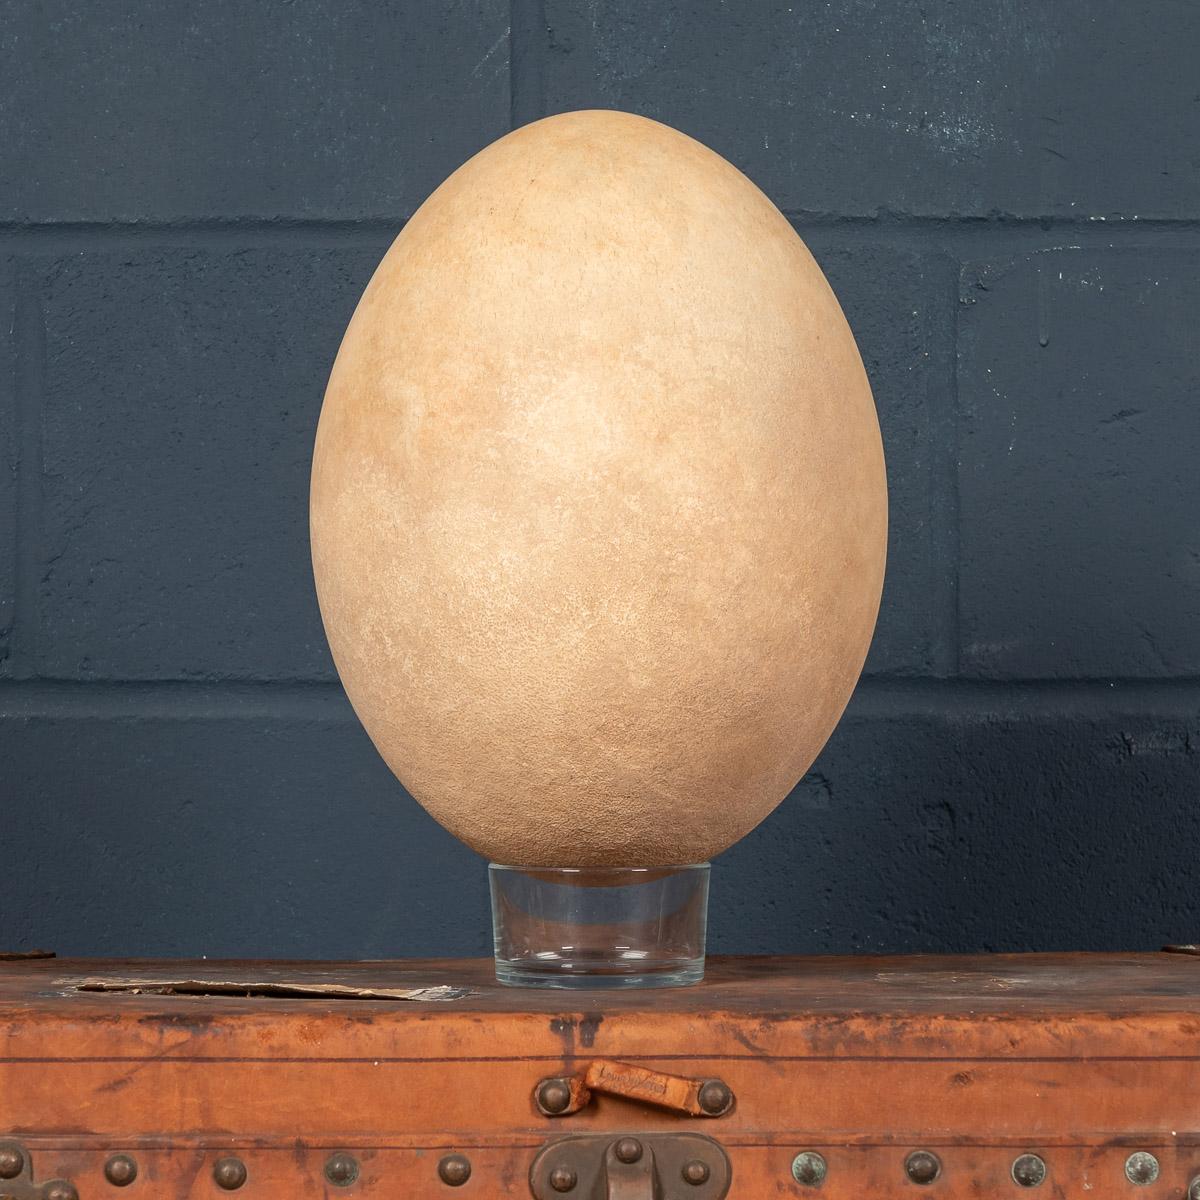 An extremely rare elephant bird egg, completely intact. The Elephant Bird, formally categorised as Aepyornis Maximus, is an enormous flightless bird native to Madagascar. Standing as high as 3.4 metres and weighing up to 500kg, the Elephant Bird was